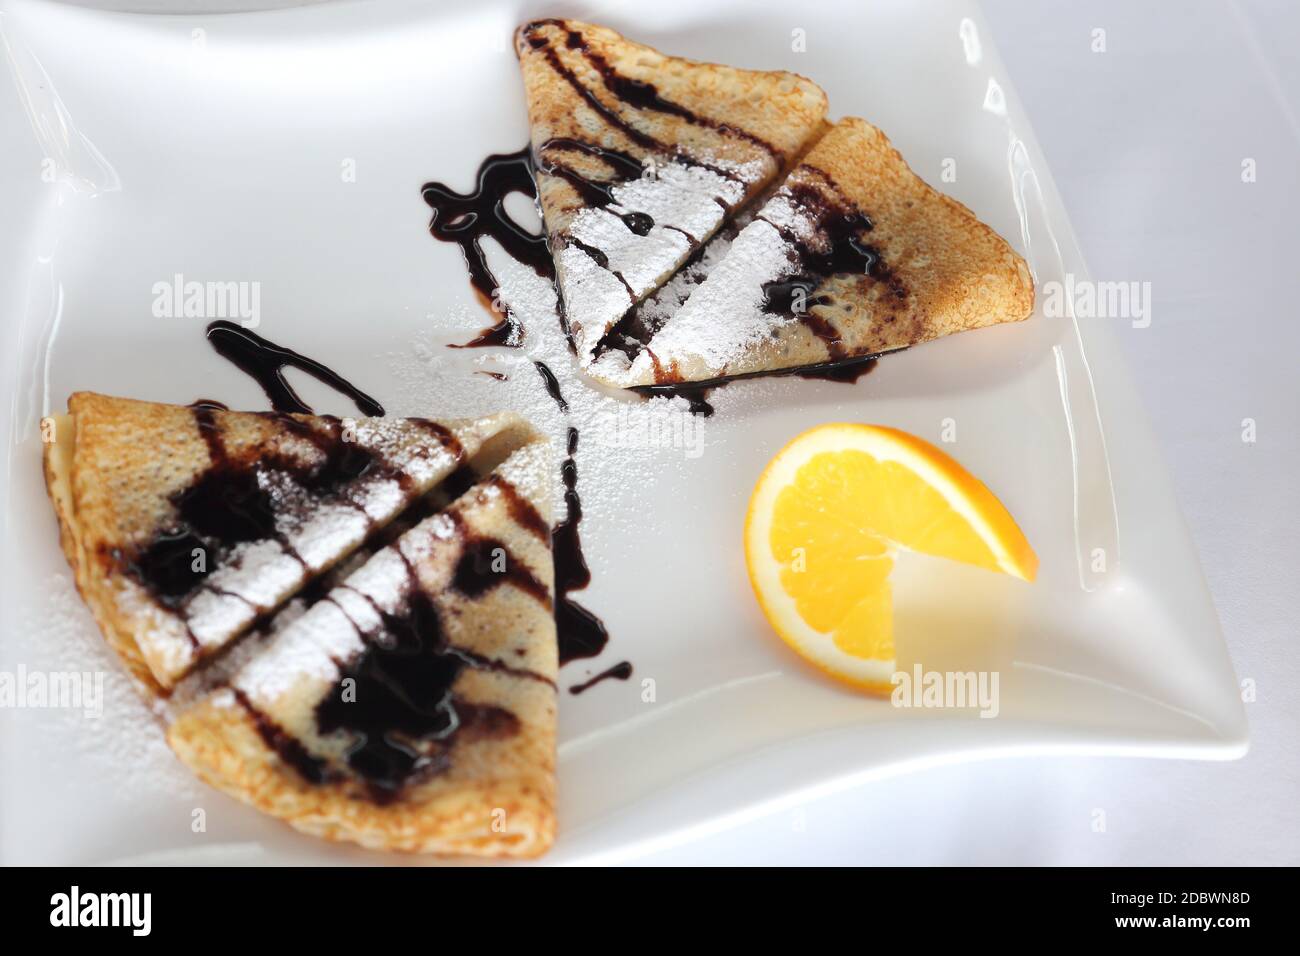 some pancakes with chocolate and sugar on a plate Stock Photo